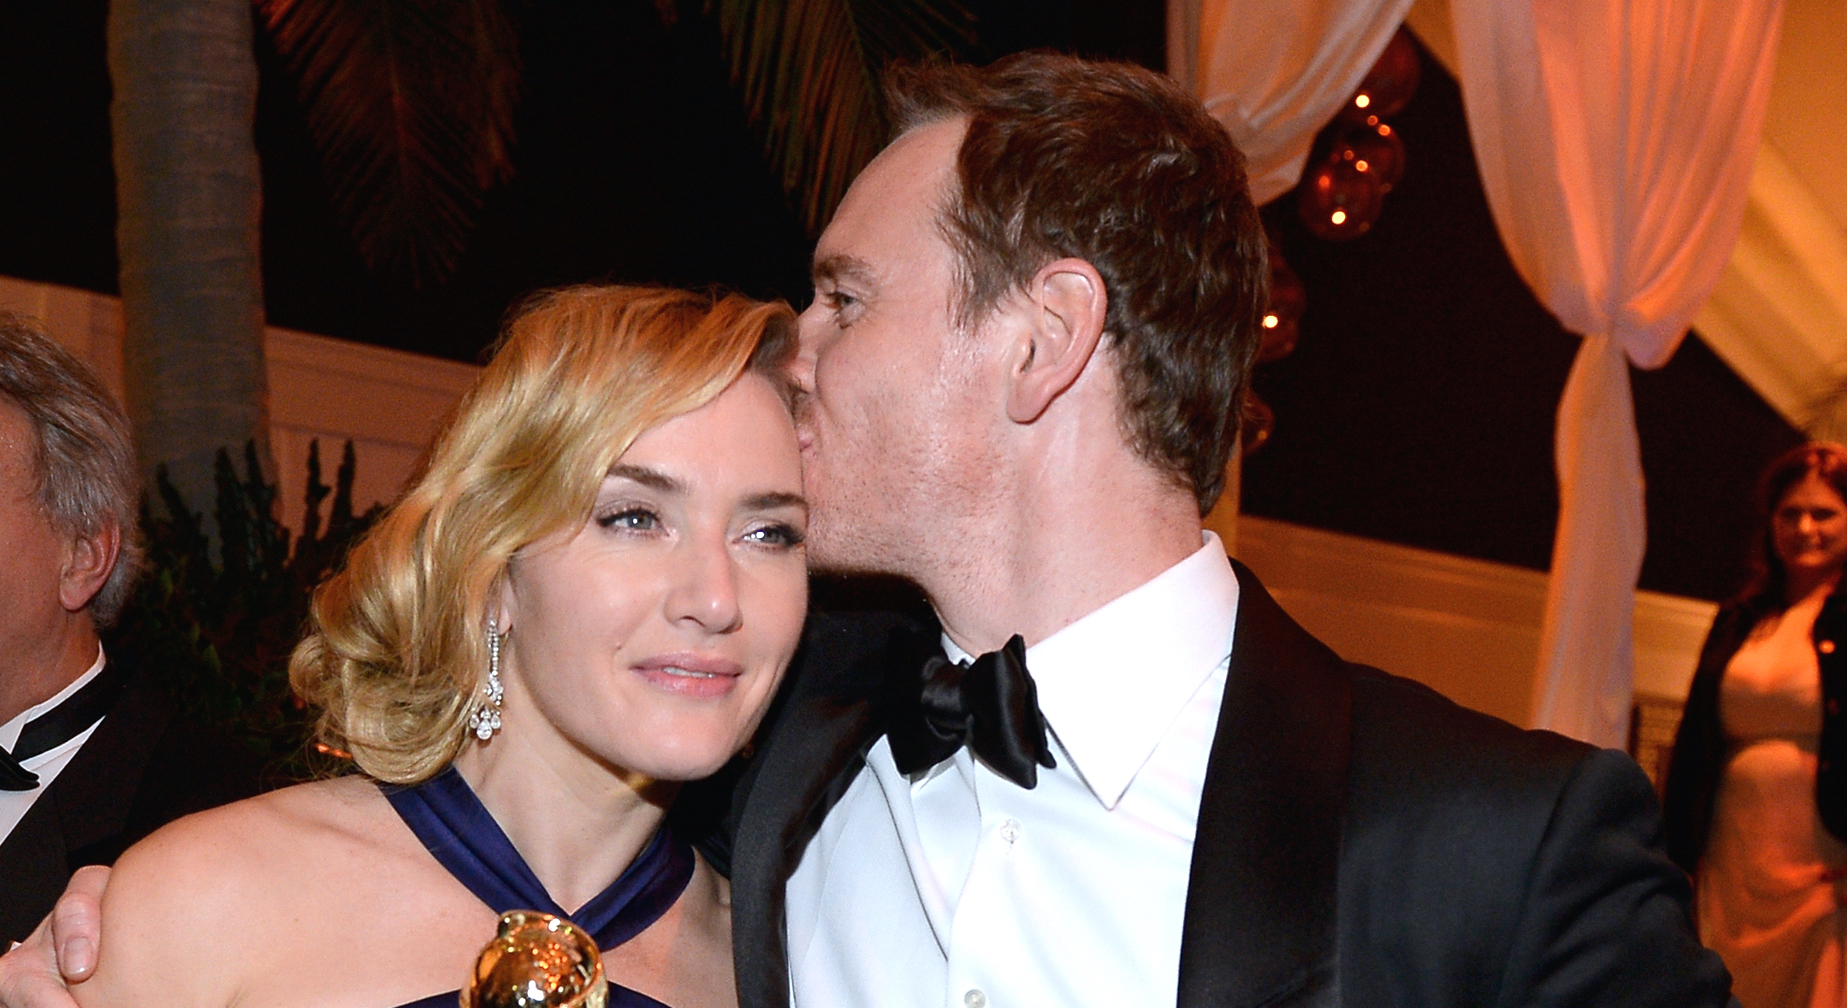 BEVERLY HILLS, CA - JANUARY 10:  73rd ANNUAL GOLDEN GLOBE AWARDS --  Pictured: Actors Kate Winslet and Michael Fassbender attend NBCUniversal's Golden Globes Post-Party Sponsored by Chrysler held at the Beverly Hilton Hotel on January 10, 2016.  (Photo by Kevork Djansezian/NBC/NBCU Photo Bank via Getty Images)